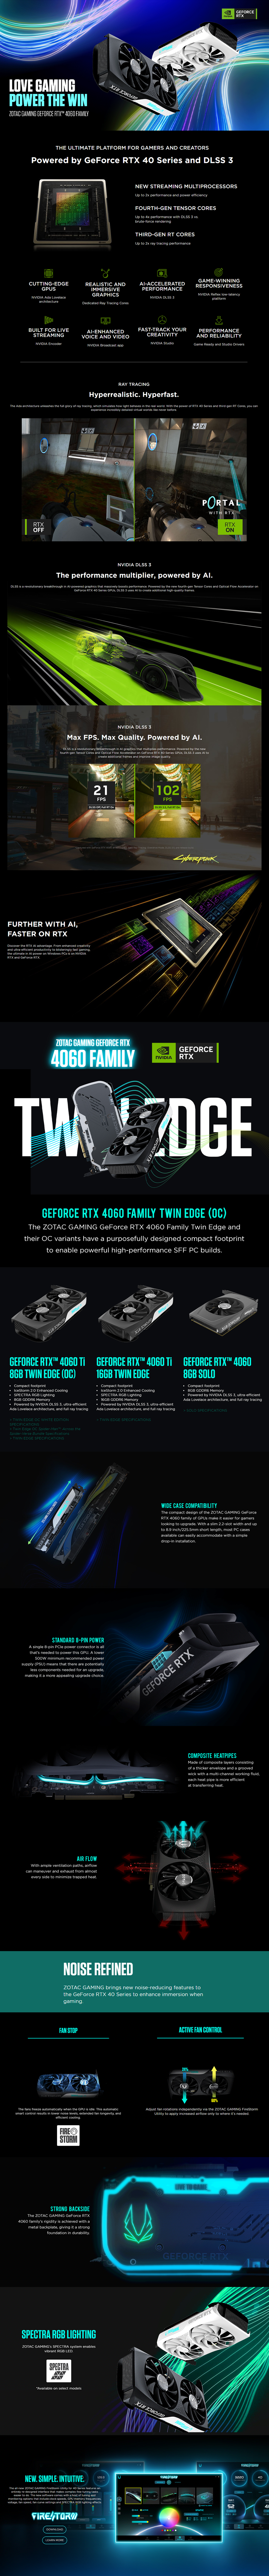 A large marketing image providing additional information about the product ZOTAC GAMING GeForce RTX 4060 8GB Twin Edge OC GDDR6 - Additional alt info not provided